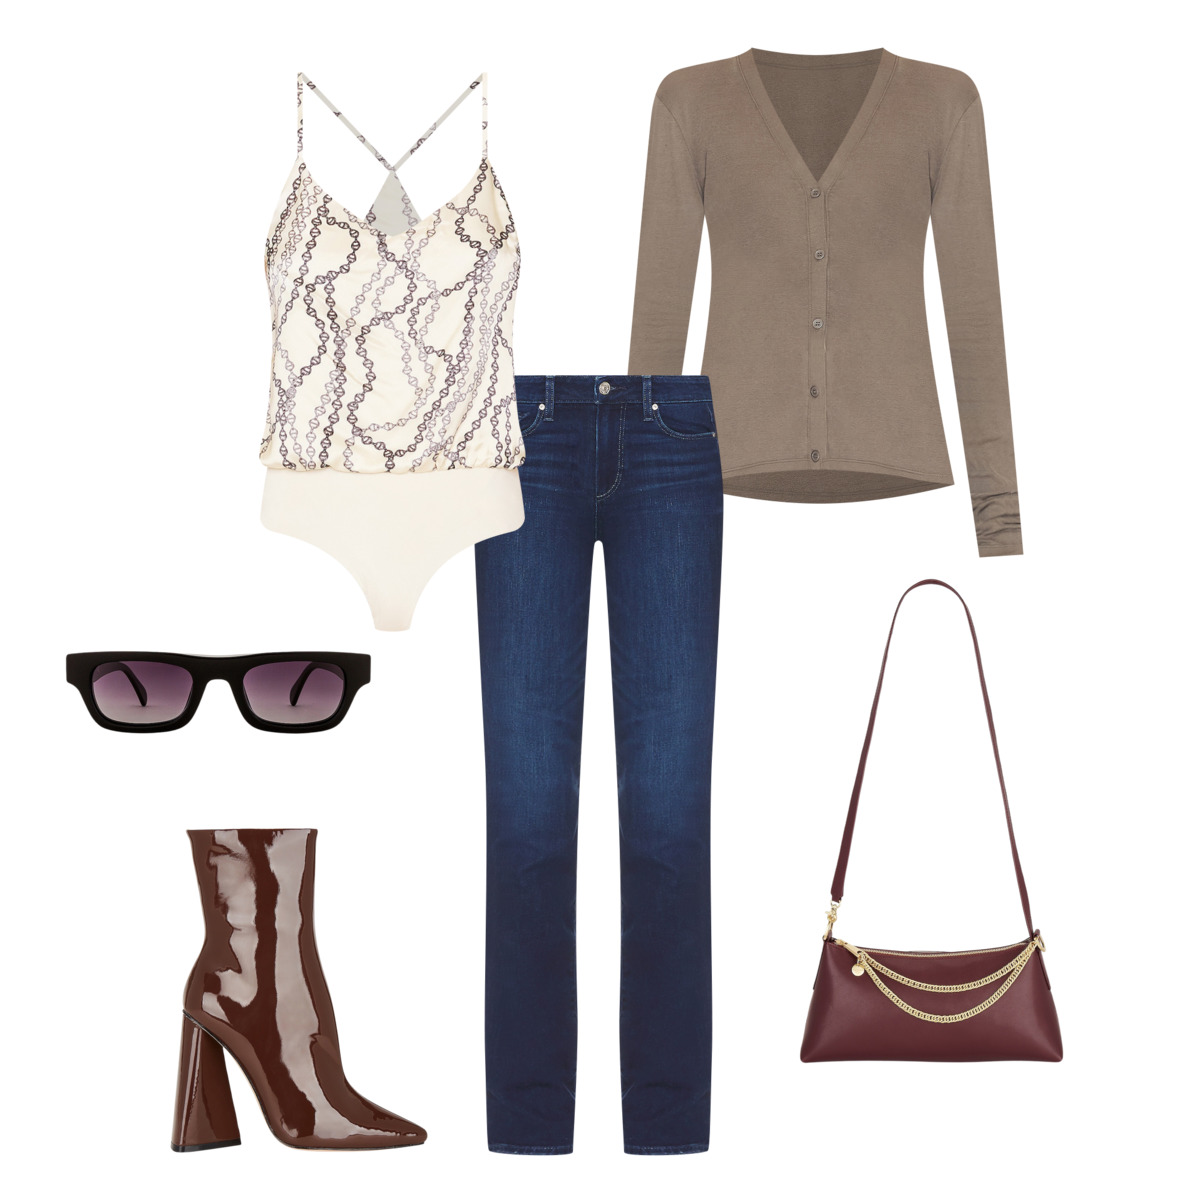 Revolve outfit featuring white bodysuit with silver chain print, light brown cardigan, dark denim jeans, dark brown purse with gold chain detailing, Sleek dark brown mid-calf heeled boots, and sunglasses. Outfit powered by Stylitics for the Shoptalk style guide. 